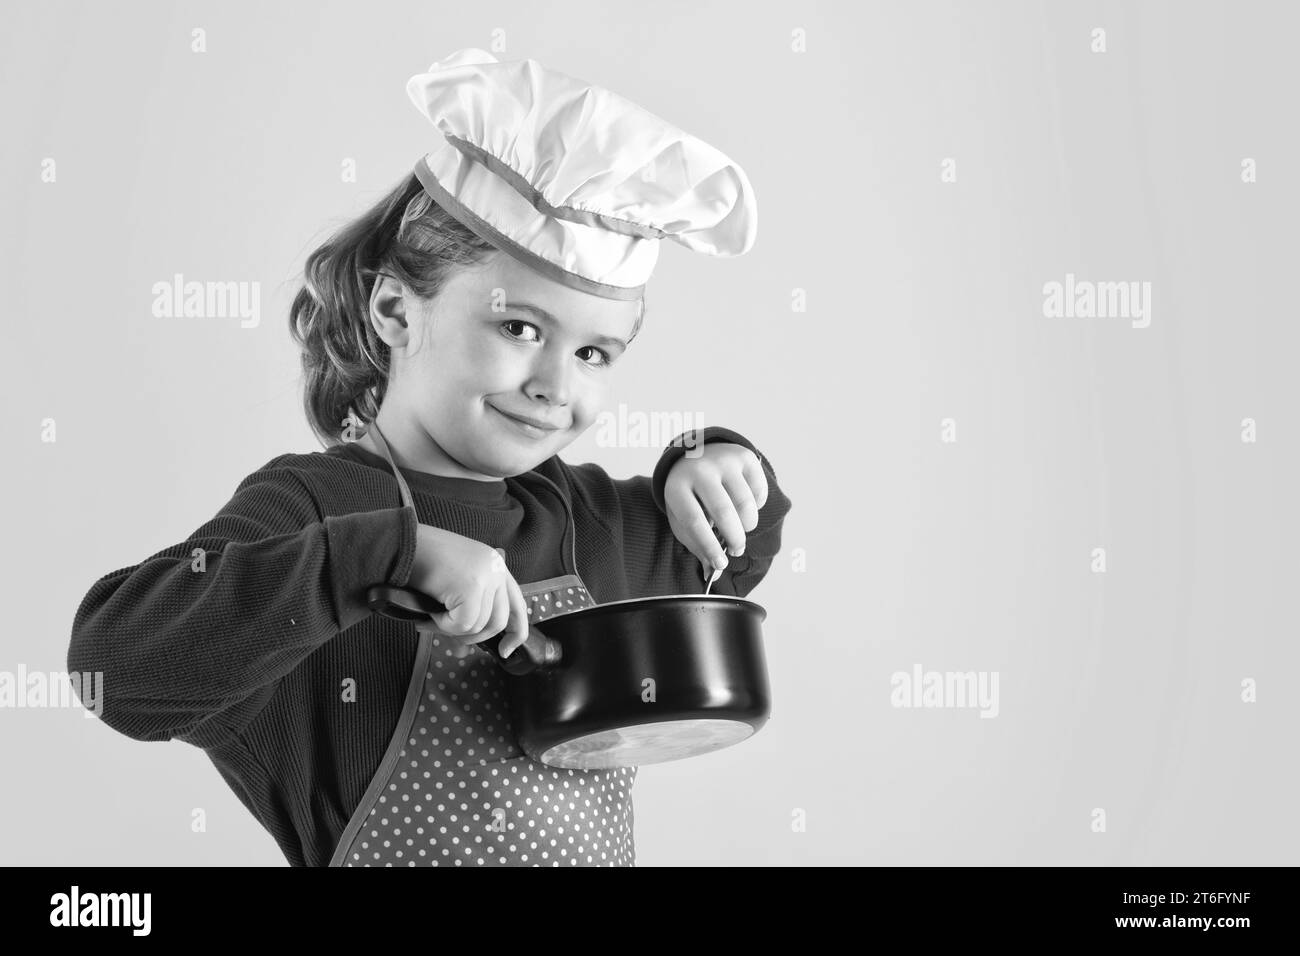 Kid chef cook with cooking pot stockpot. Excited chef cook. Child wearing cooker uniform and chef hat preparing food, studio portrait Stock Photo